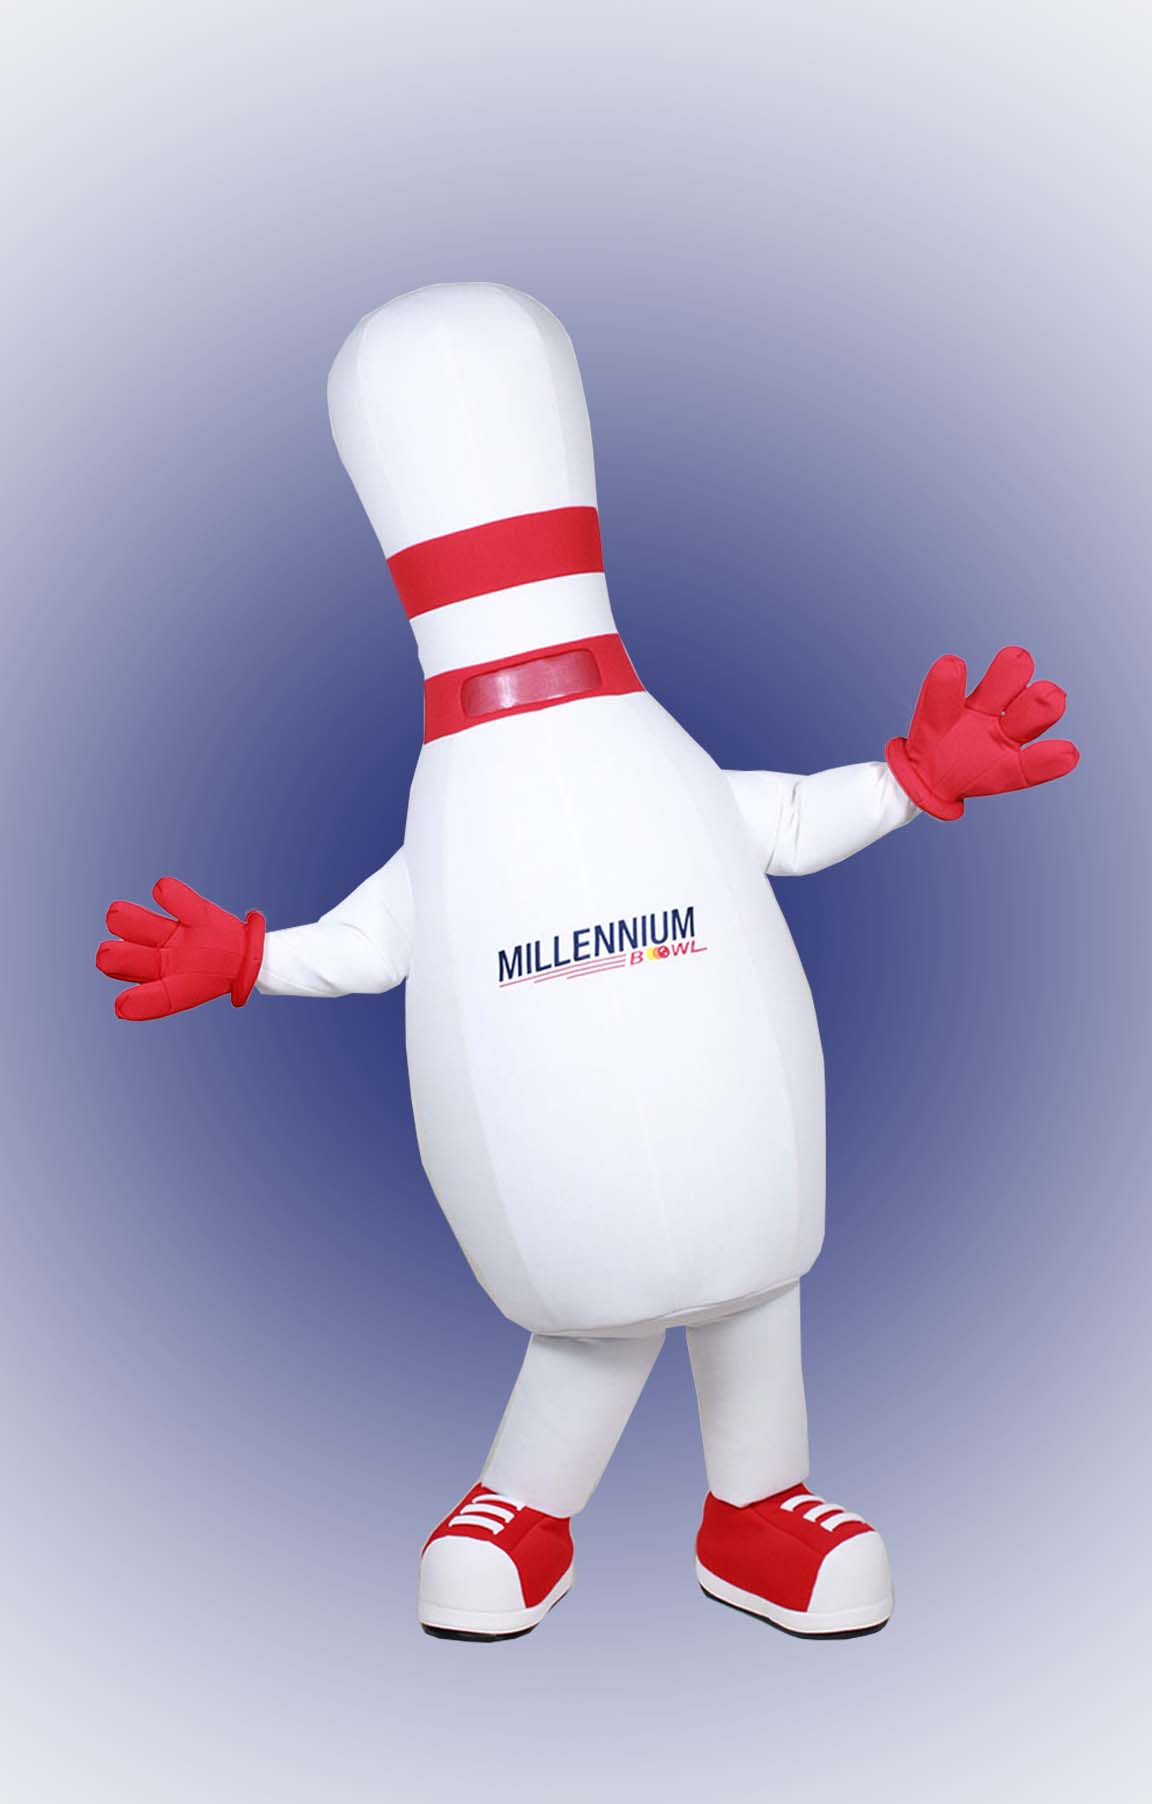 Bowling Pin Mascot Costume by Costume Specialists for Millennium Bowl